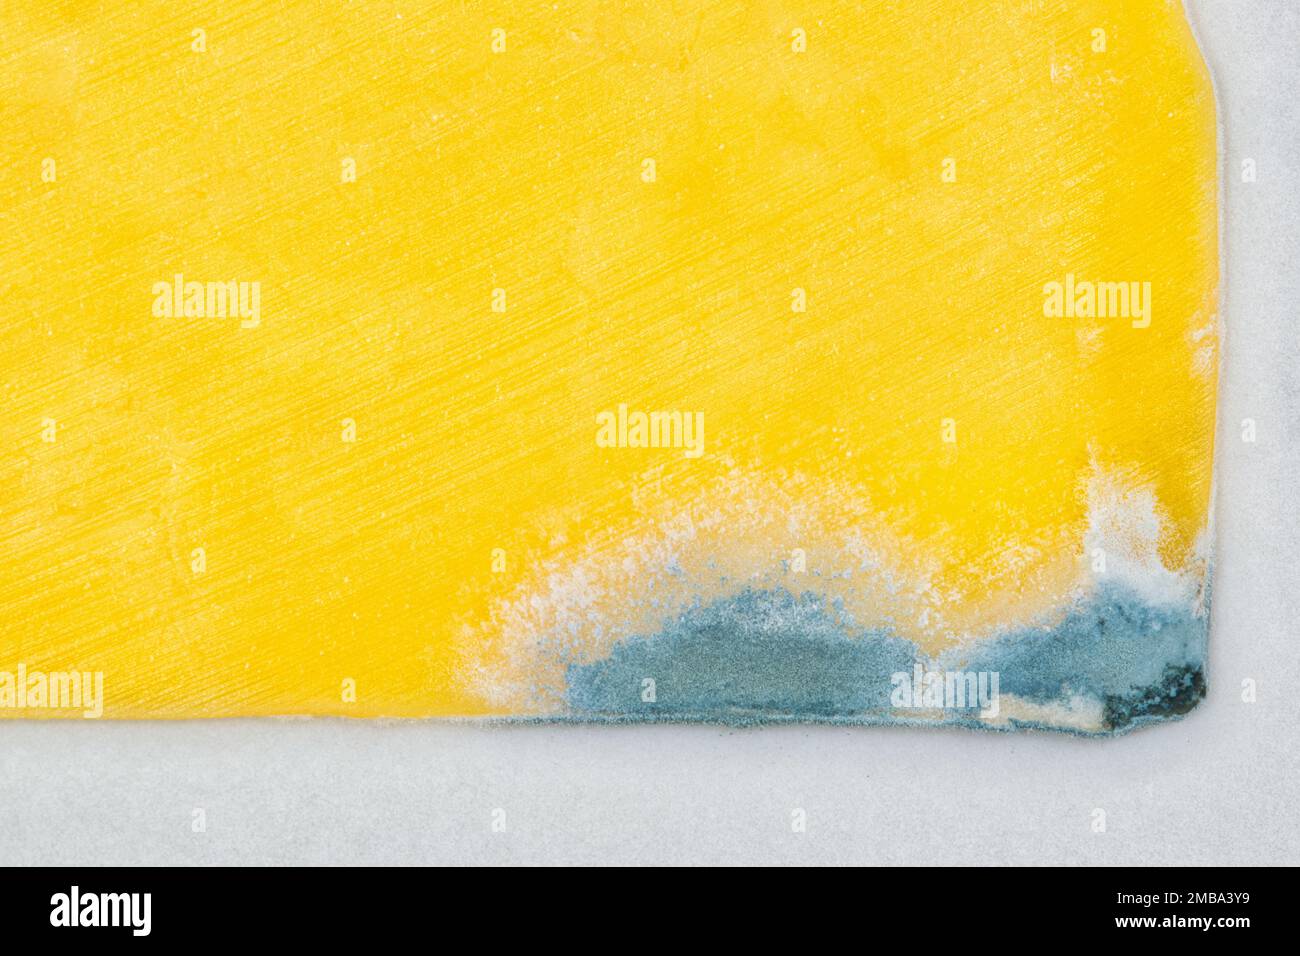 Cheddar cheese partial slice with mold growing on the corner. Flat lay concept, closeup macro with copy space. Stock Photo